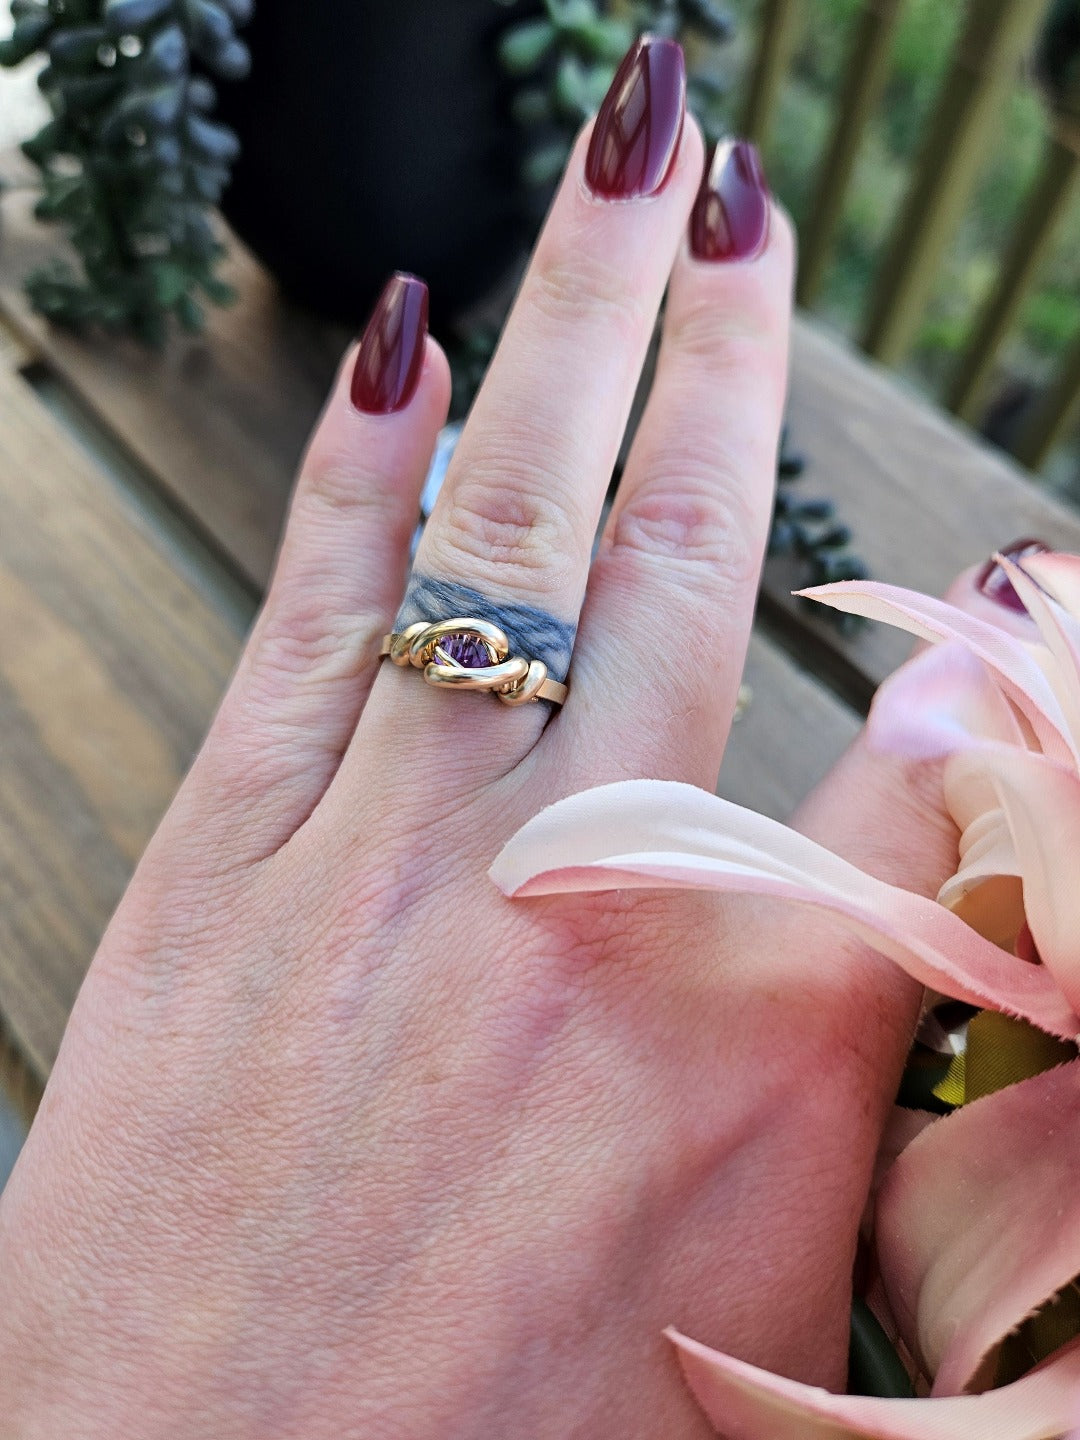 Amethyst And Gold Ring